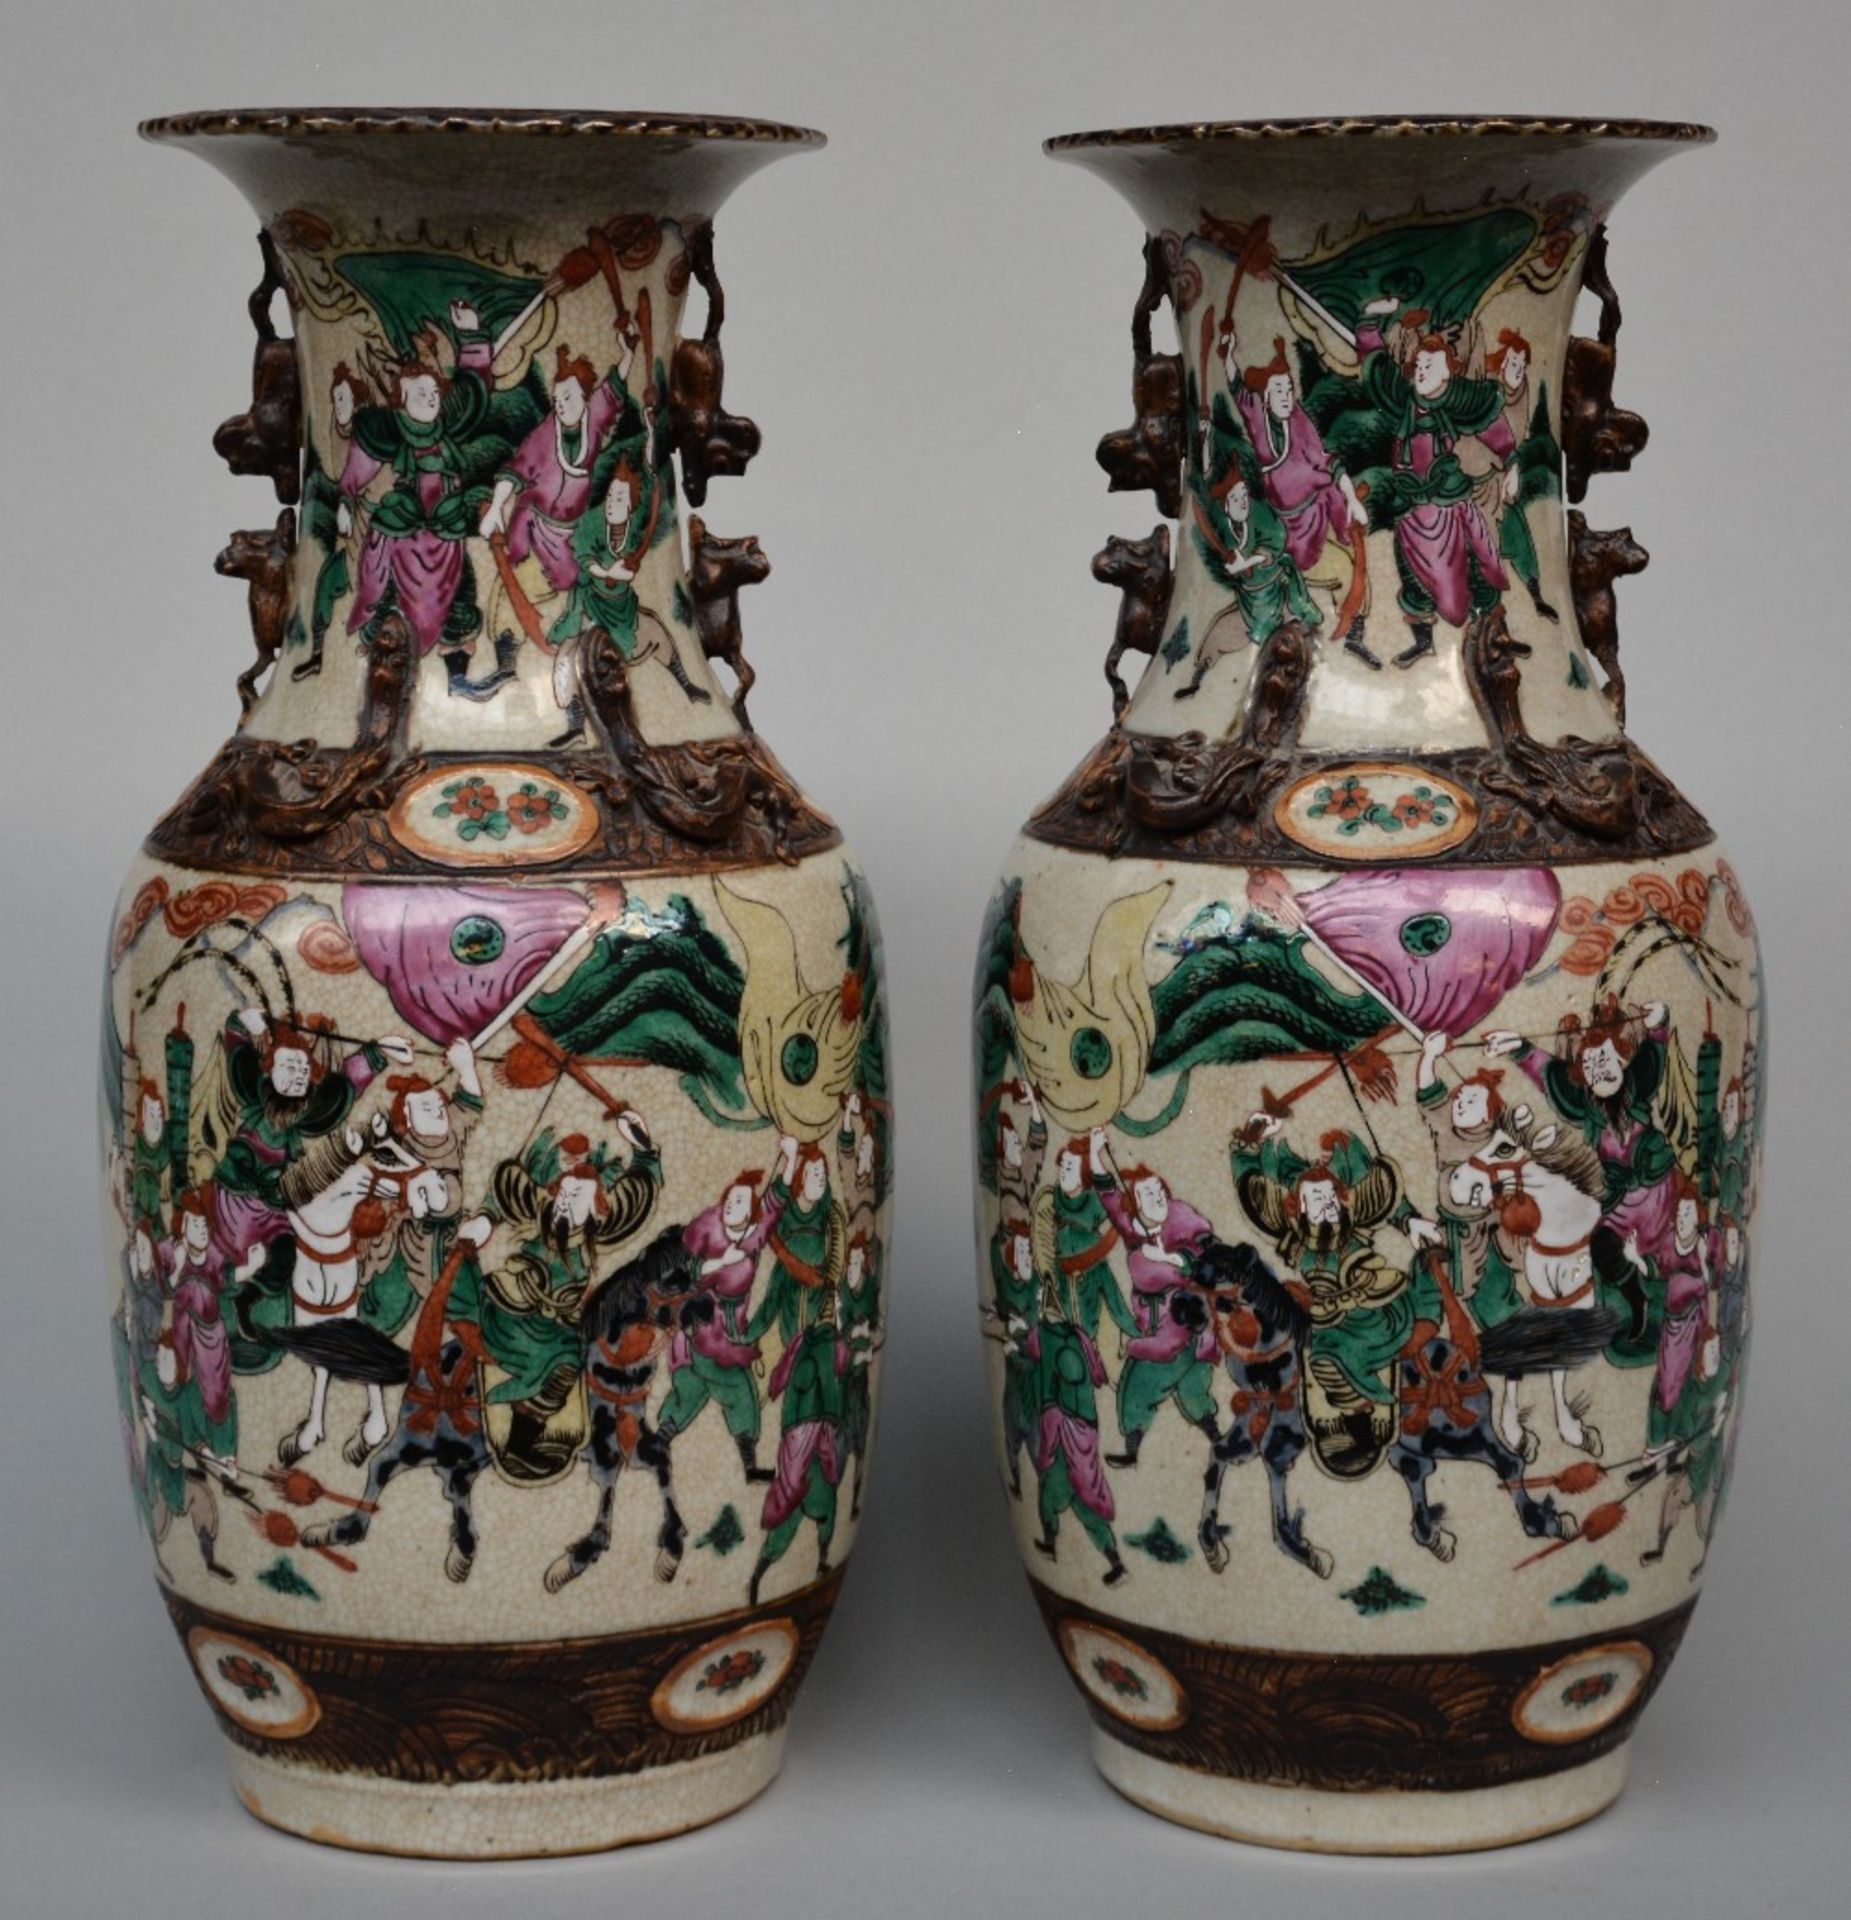 A pair of Chinese polychrome stoneware vases, decorated with a warrior scene, marked, 19thC, H 44 cm